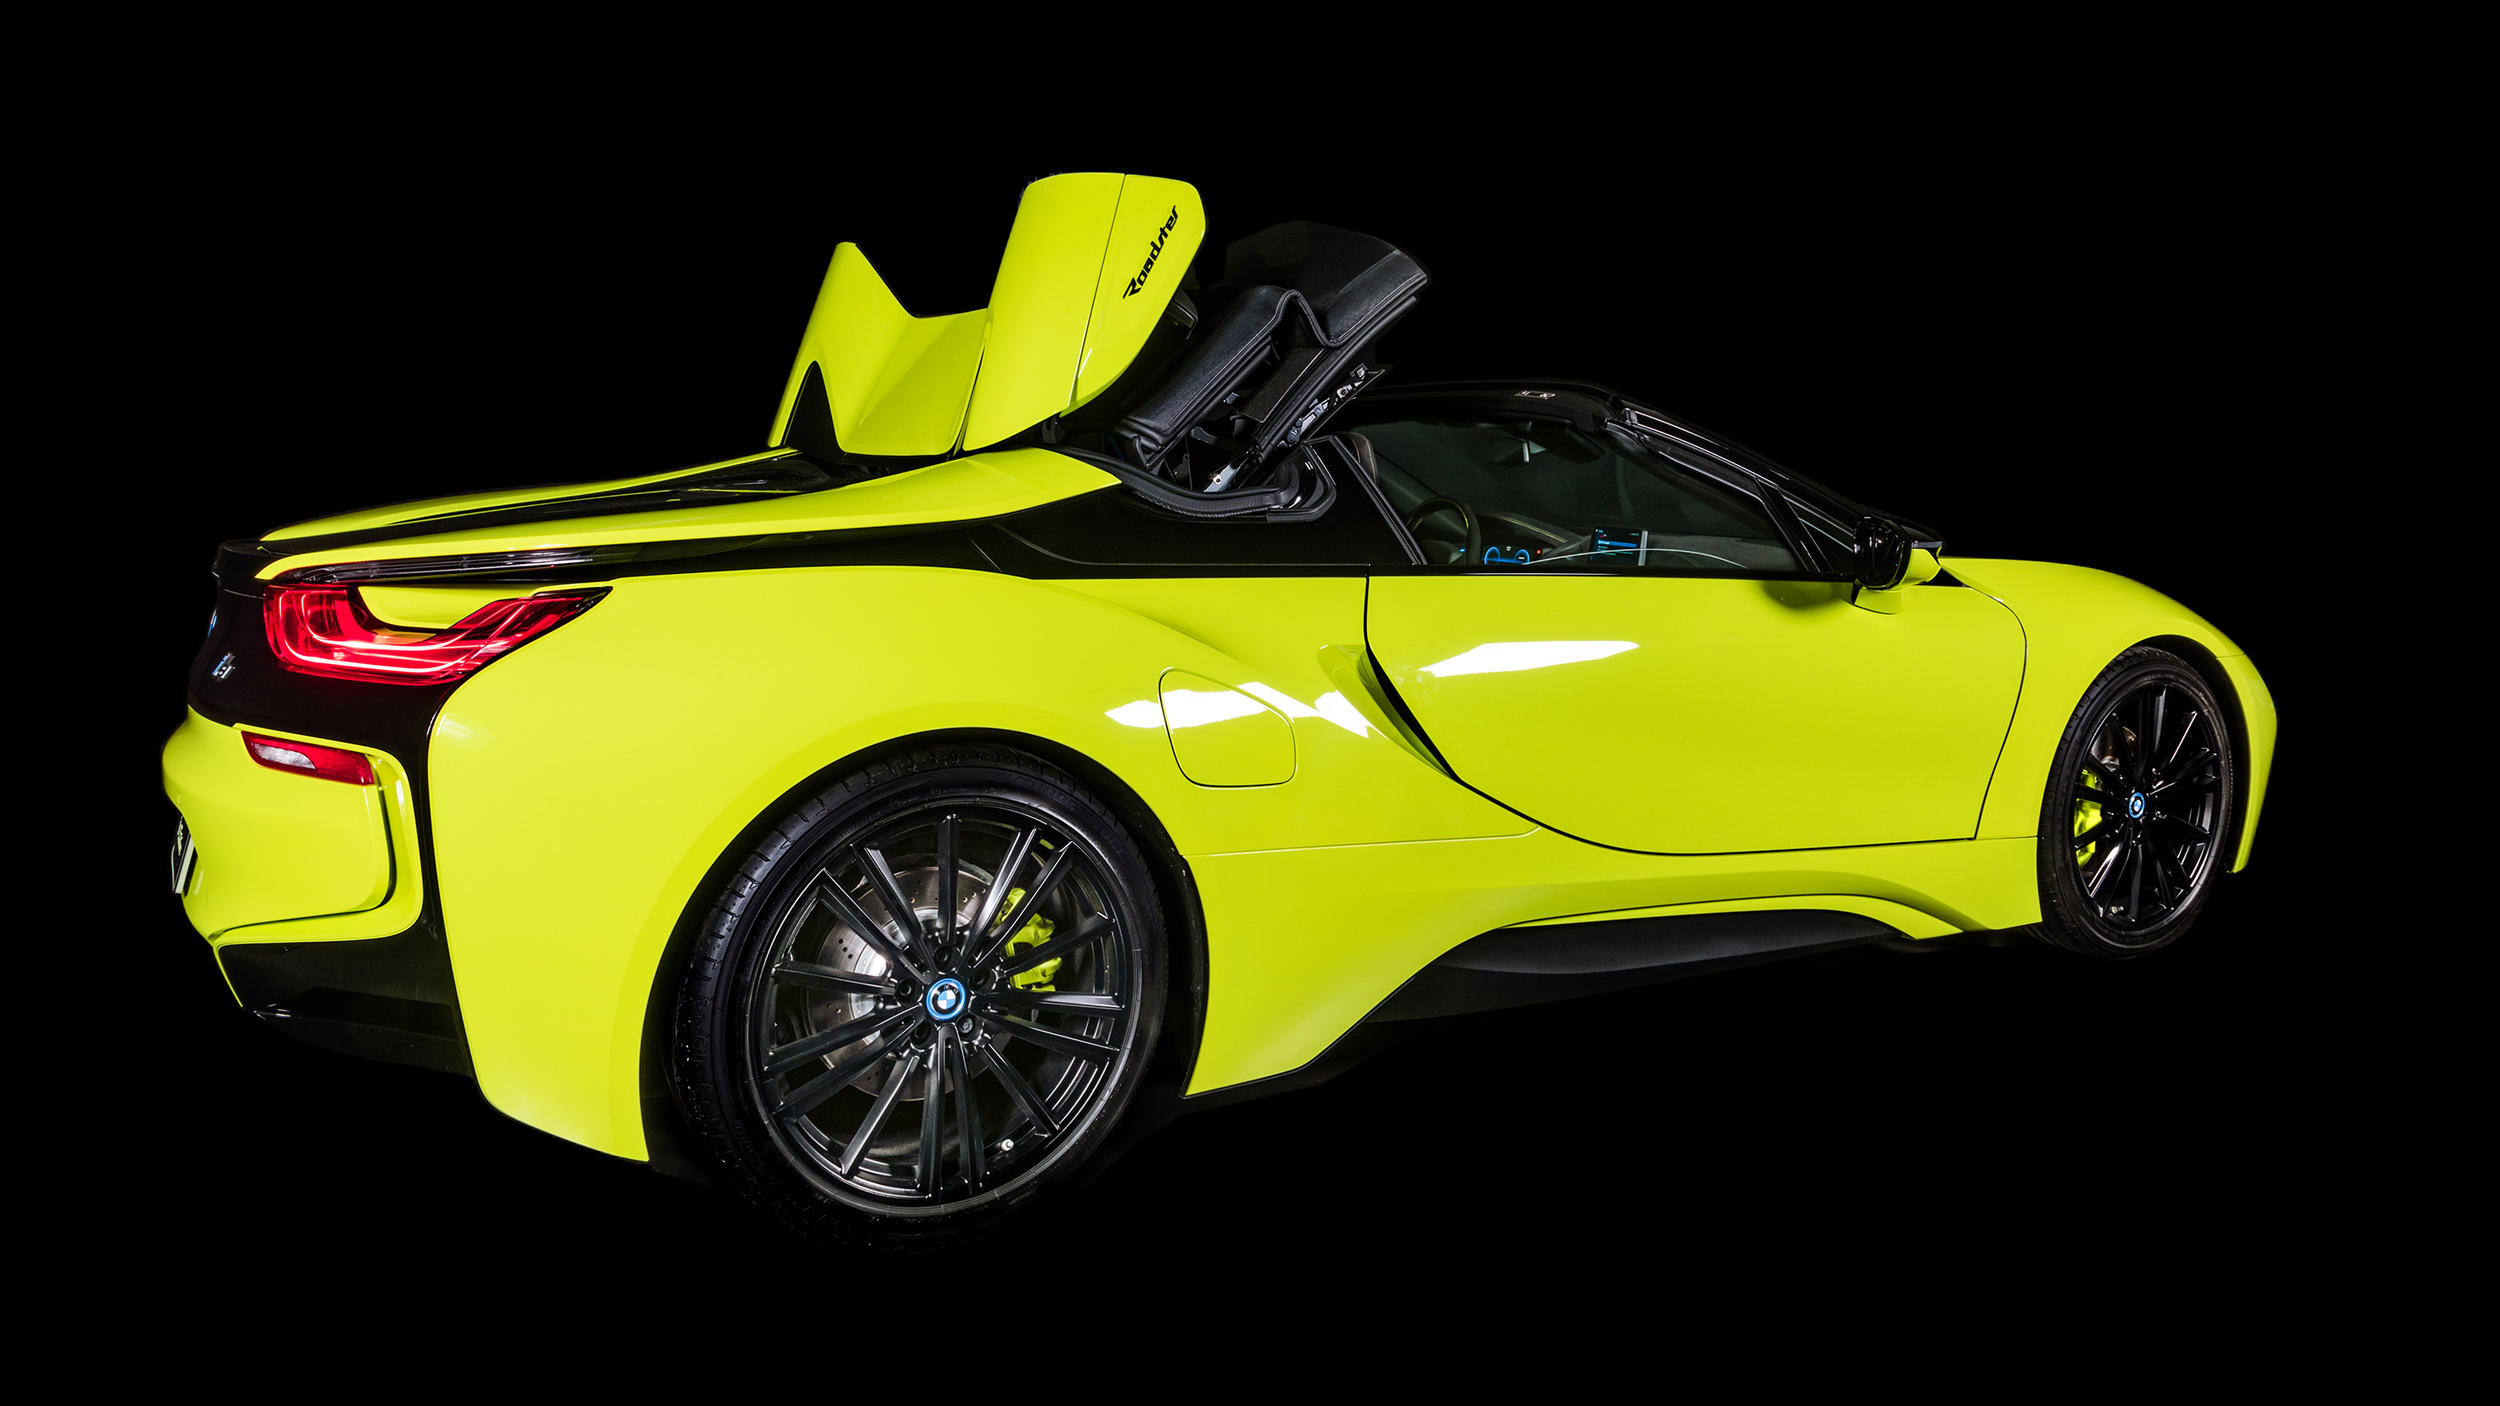 BMW i8 Roadster LimeLight Edition Photo Gallery